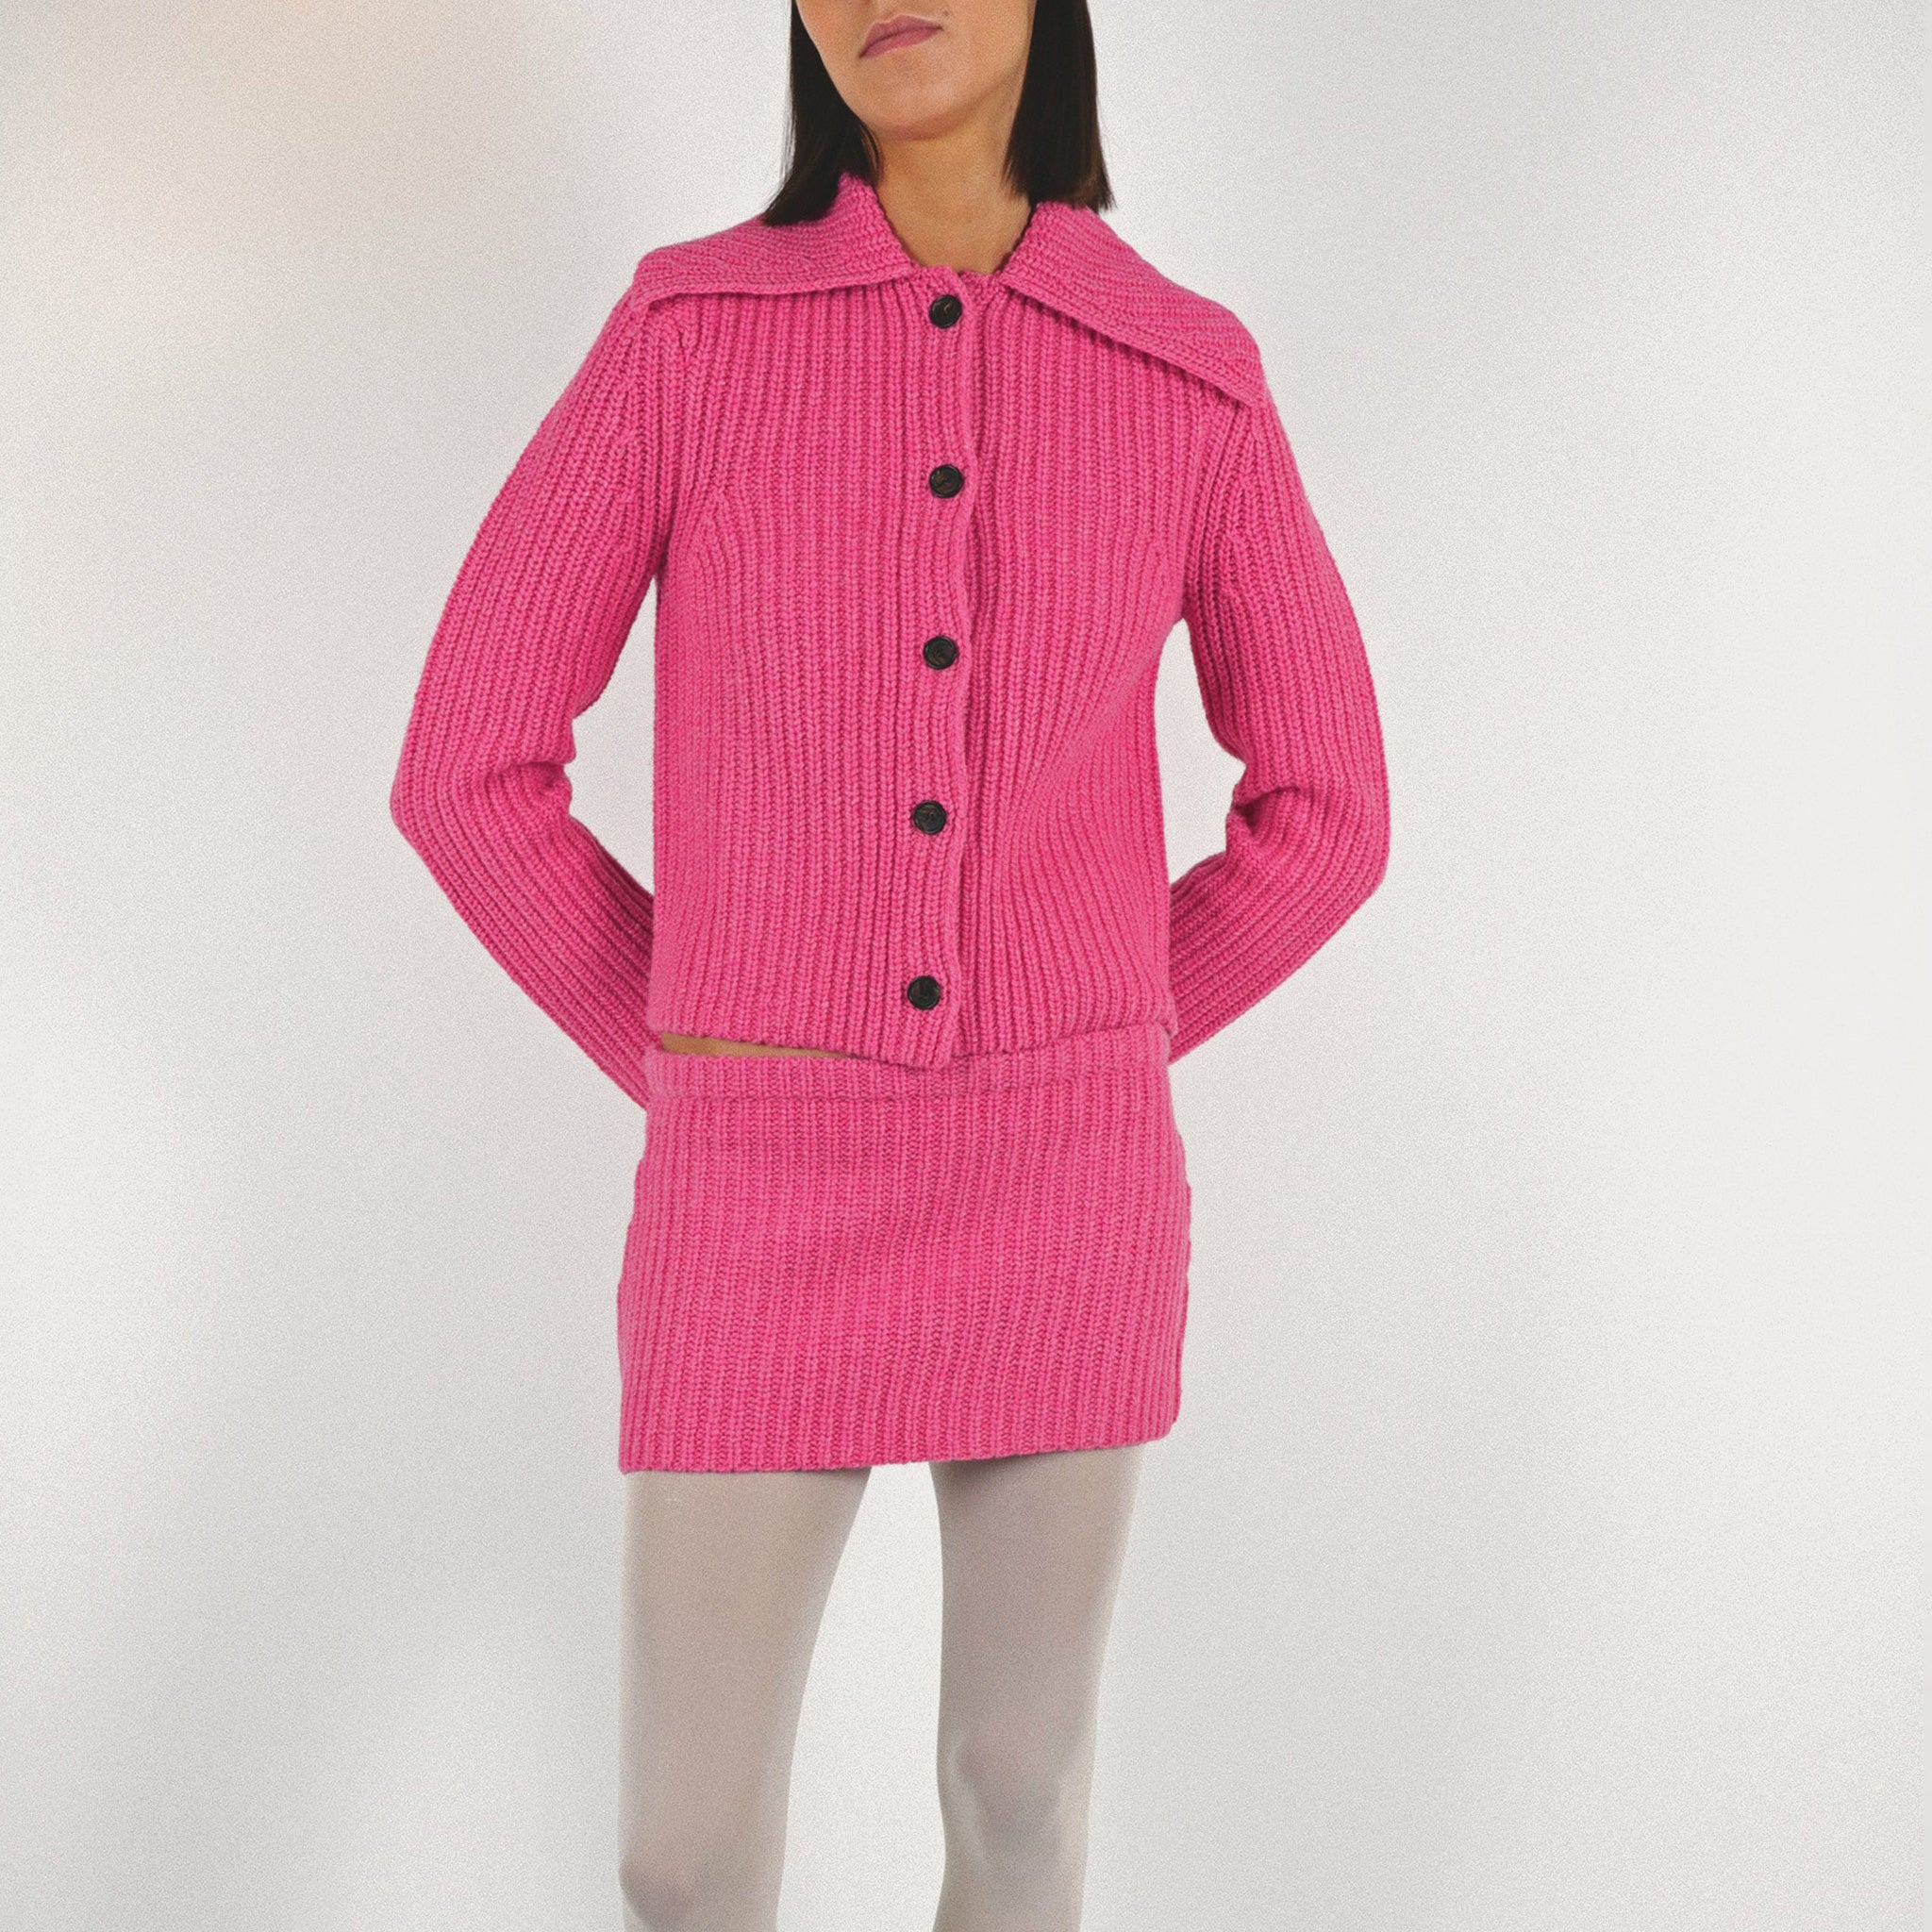 Close half body photo of model wearing a pink mini knit skirt paired with a pink knit sweater.